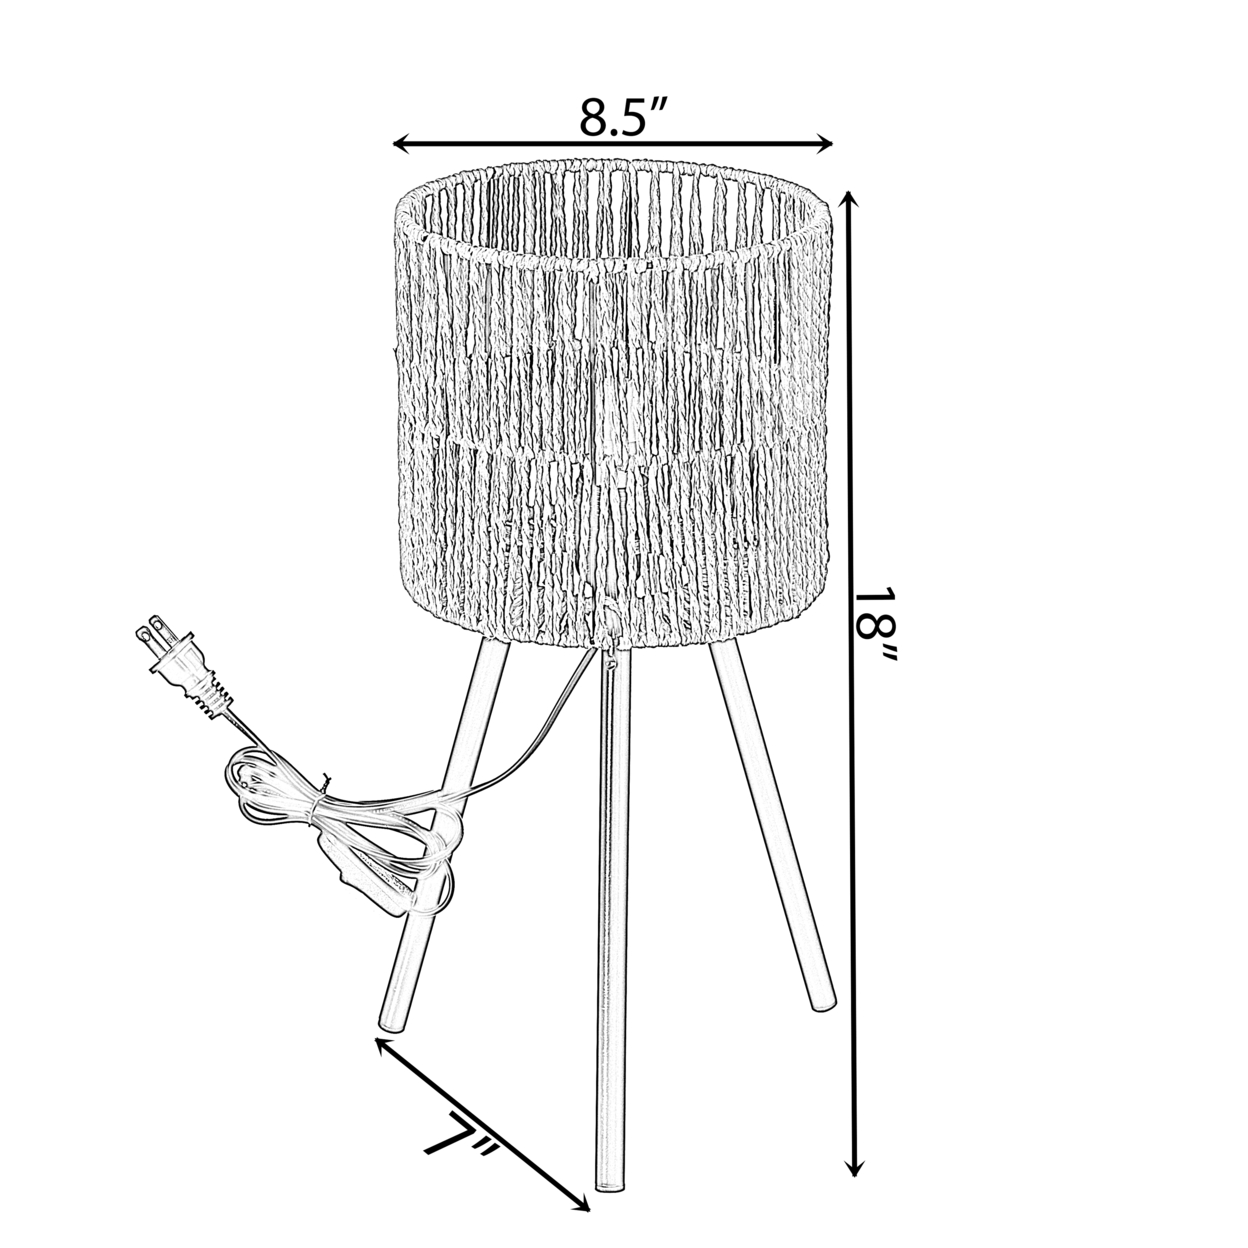 Woven Designed Bamboo Tripod Floor Lamp With Plug In Cord On And Off Switch